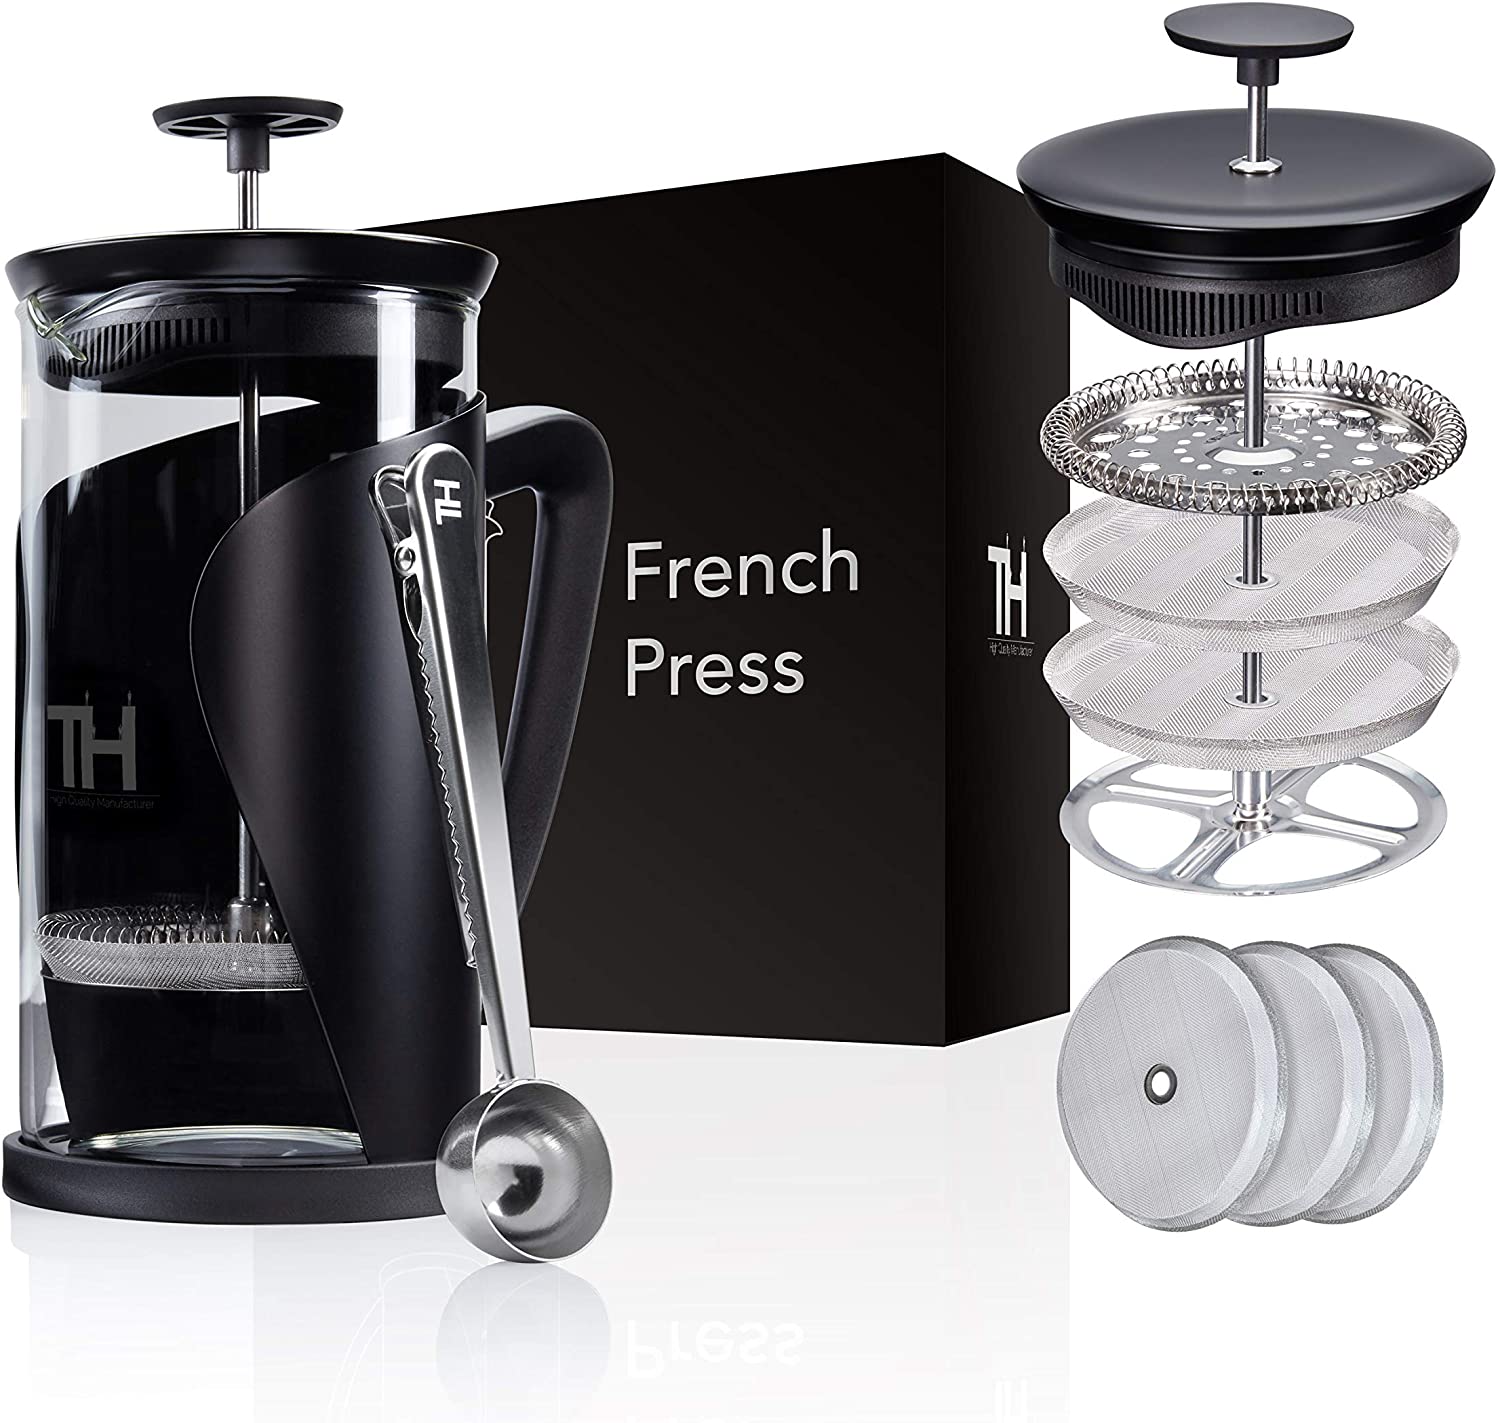 Thiru French Press Coffee Maker with 4D Filter System, Stainless Steel and Glass